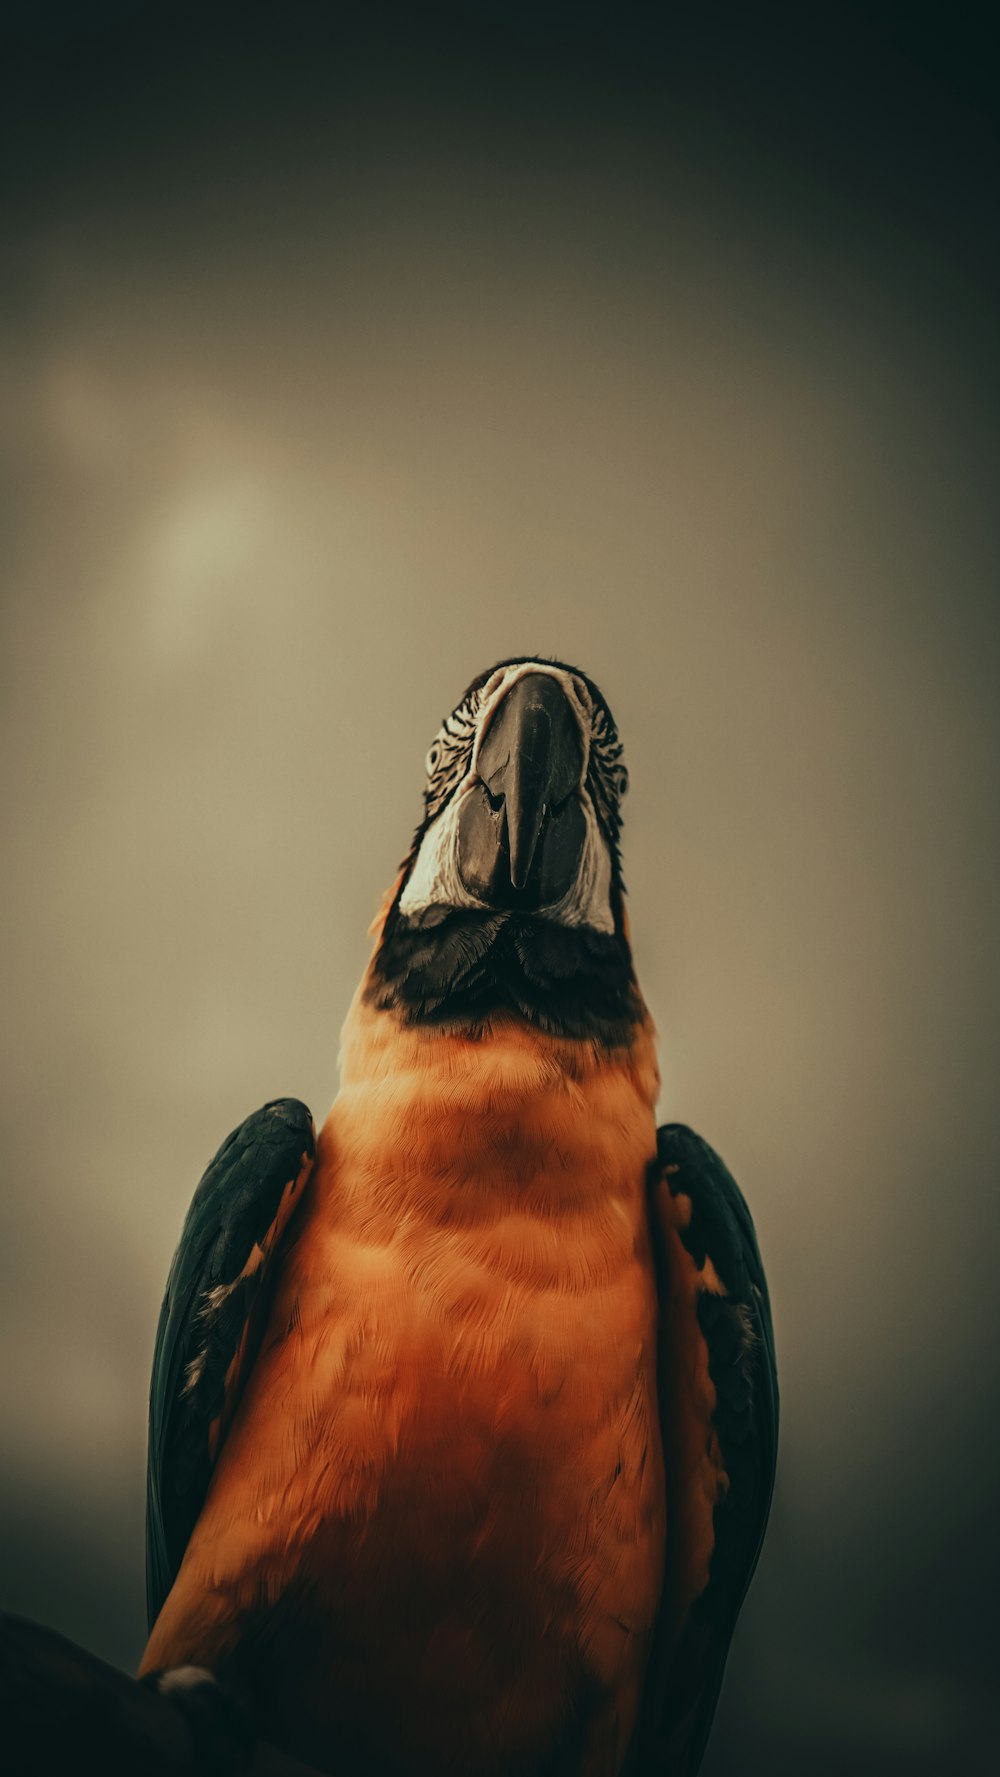 a close up of a bird with a sky background